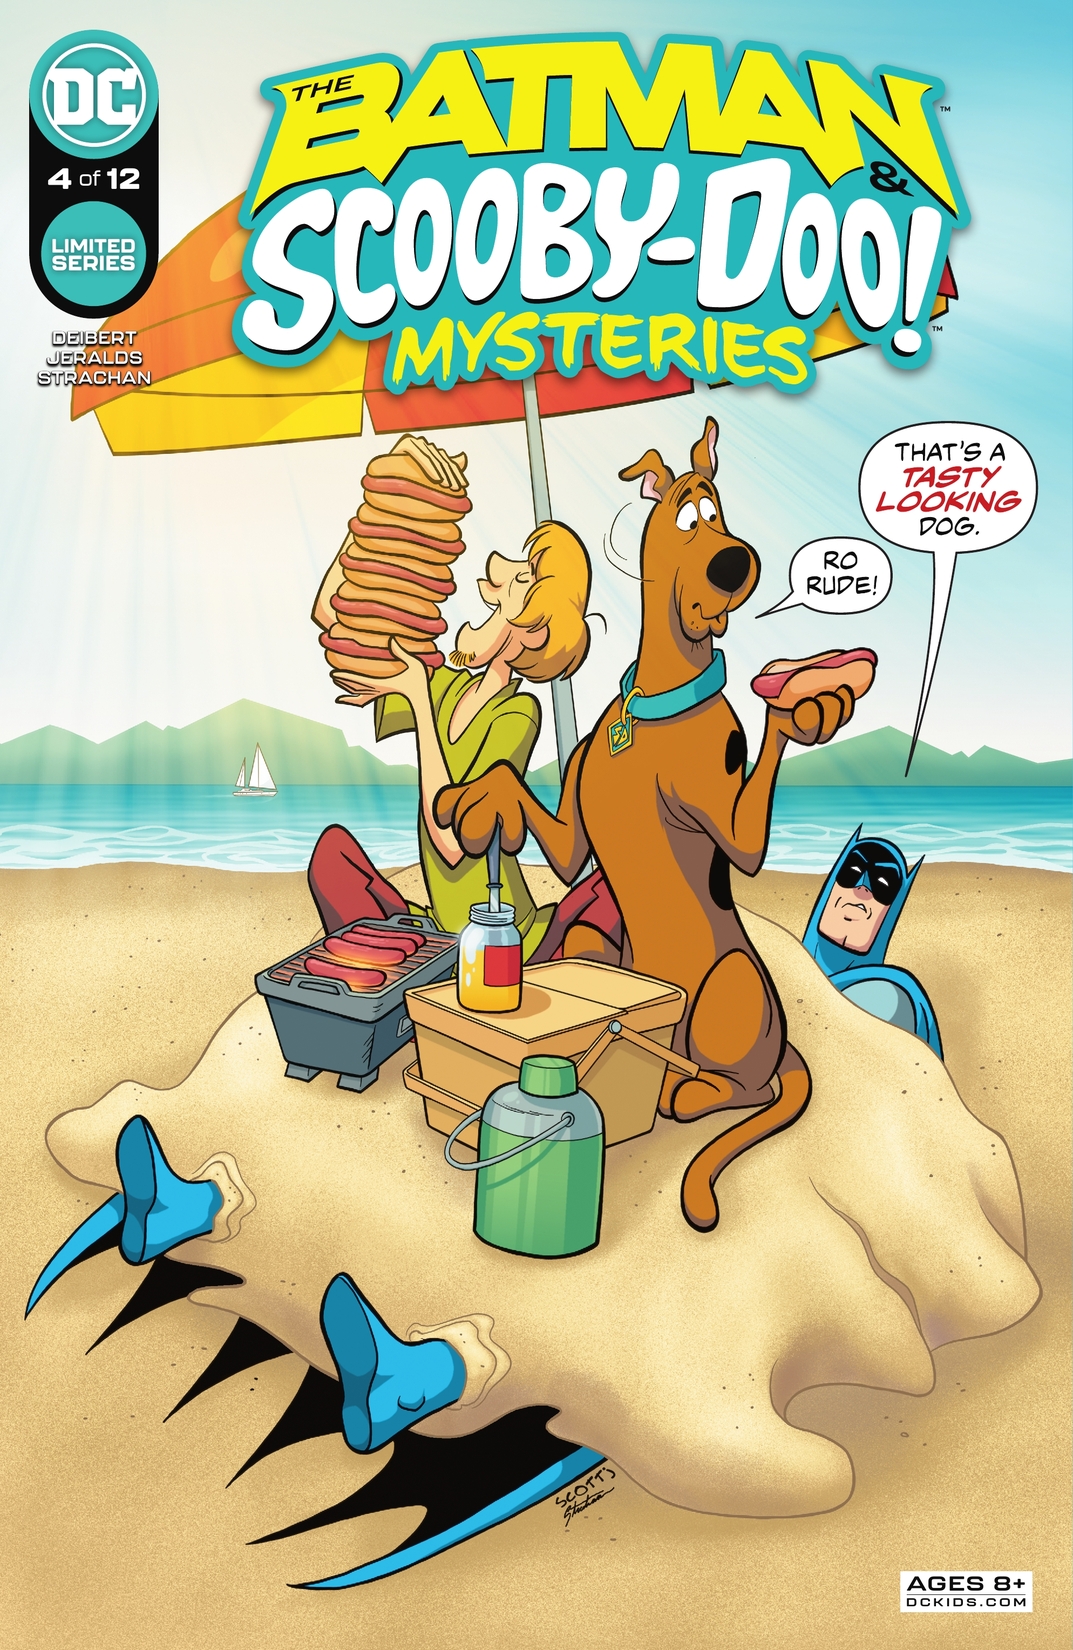 The Batman & Scooby-Doo Mysteries #4 preview images